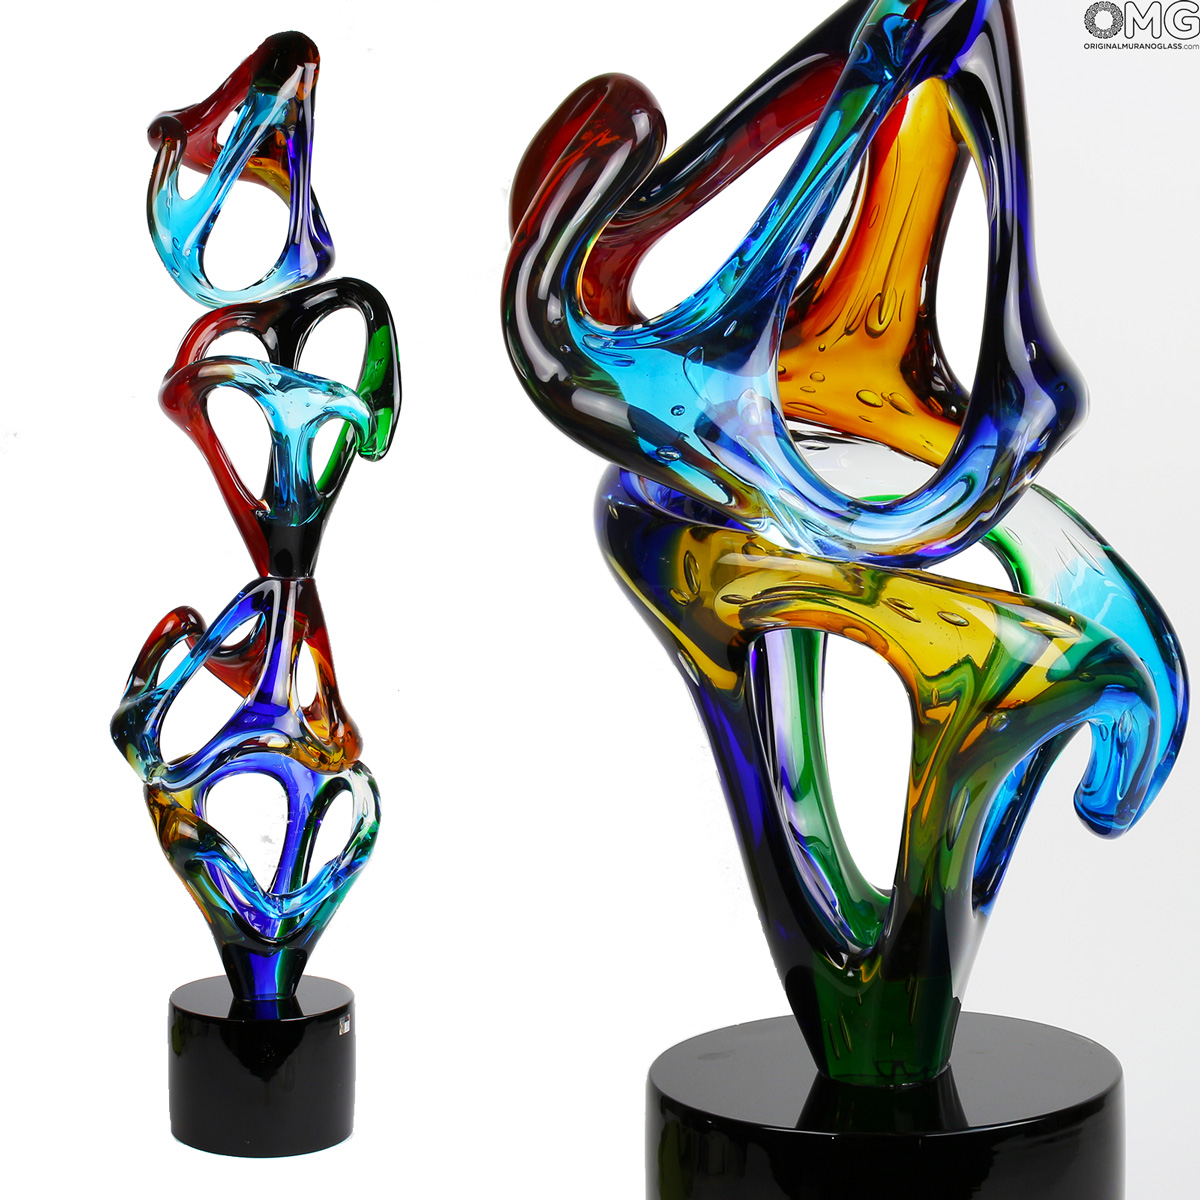 Event & Business Gifts in Murano Glass - Made in Italy: Fountain Pen in  Murano Glass - assorted colors